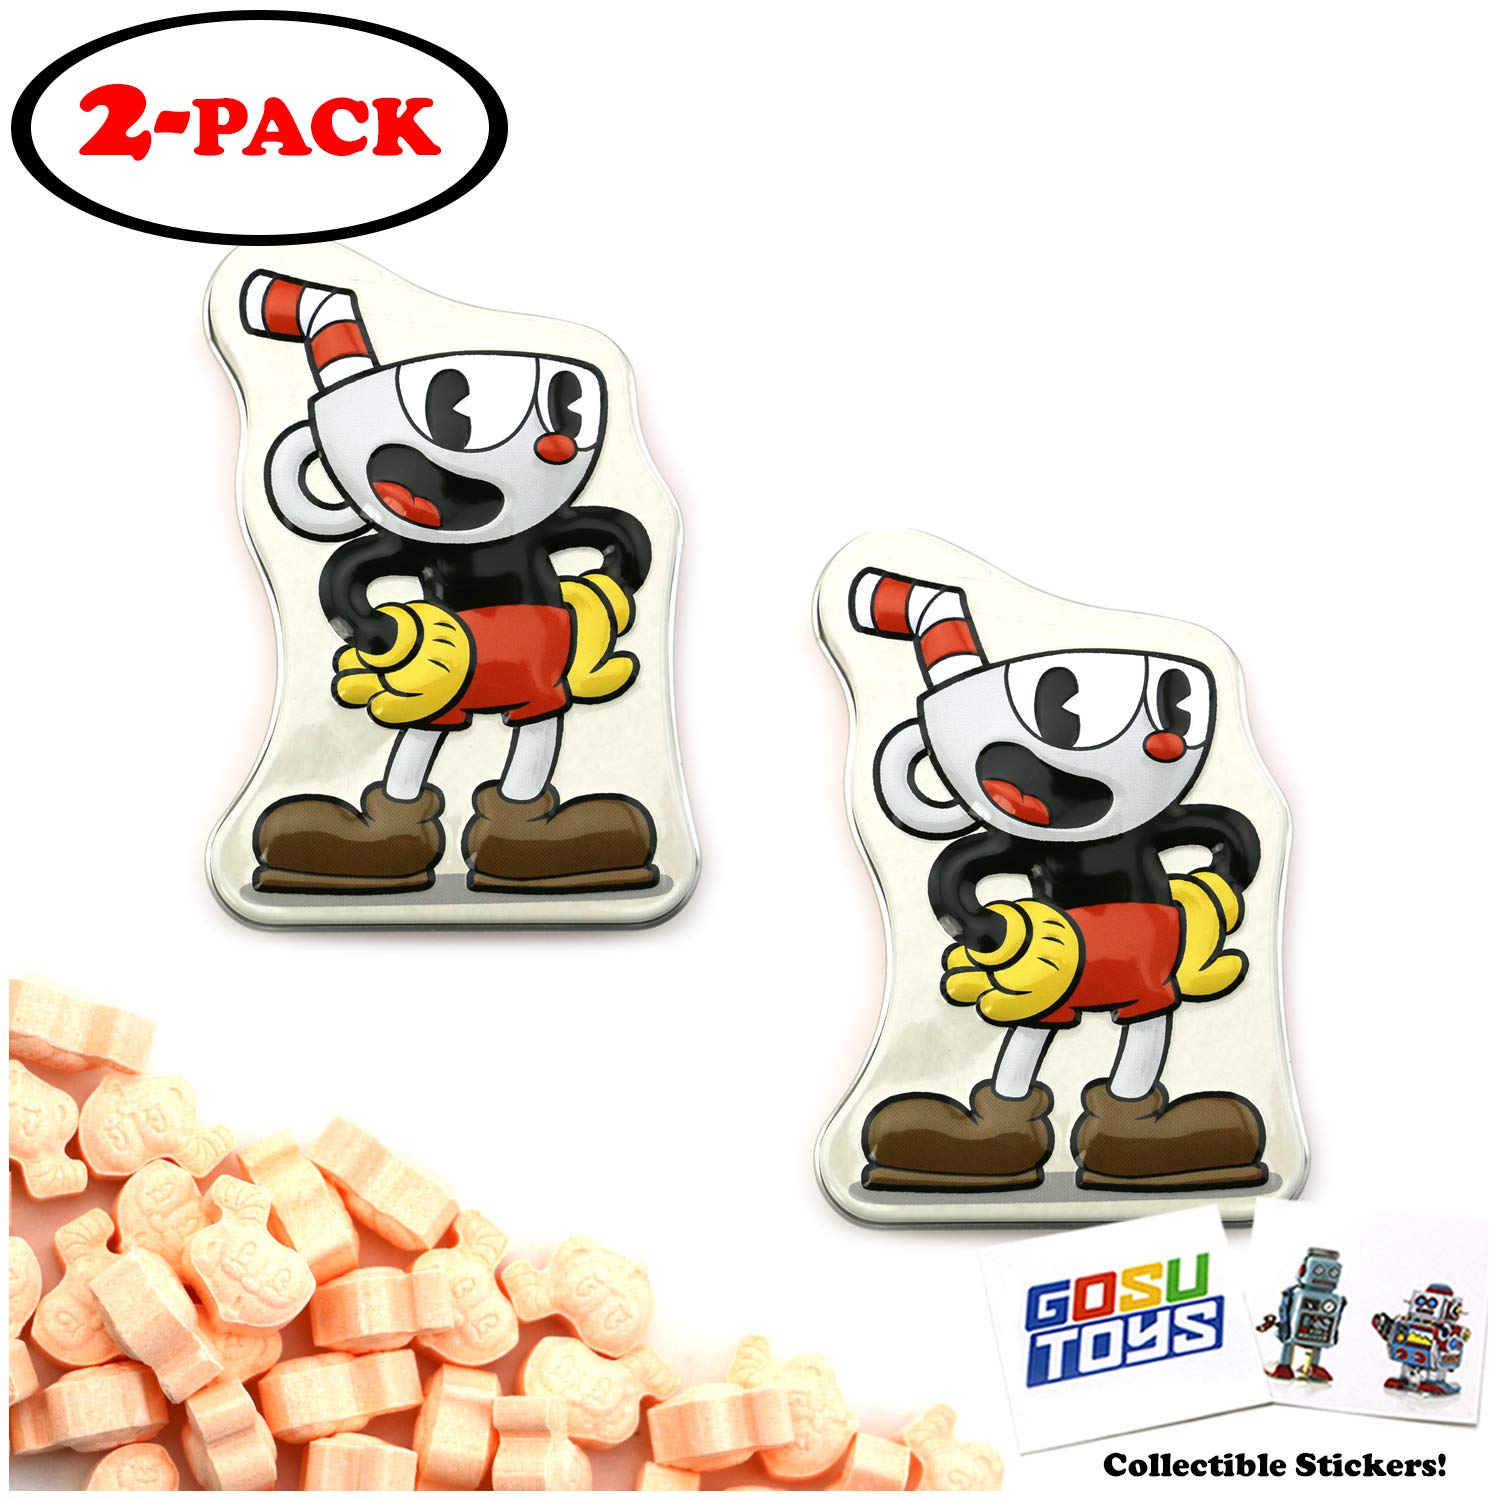 CupHead Tin Candy Sours (2 Pack) Orange Flavor Gift Stuffer with 2 GosuToys Stickers